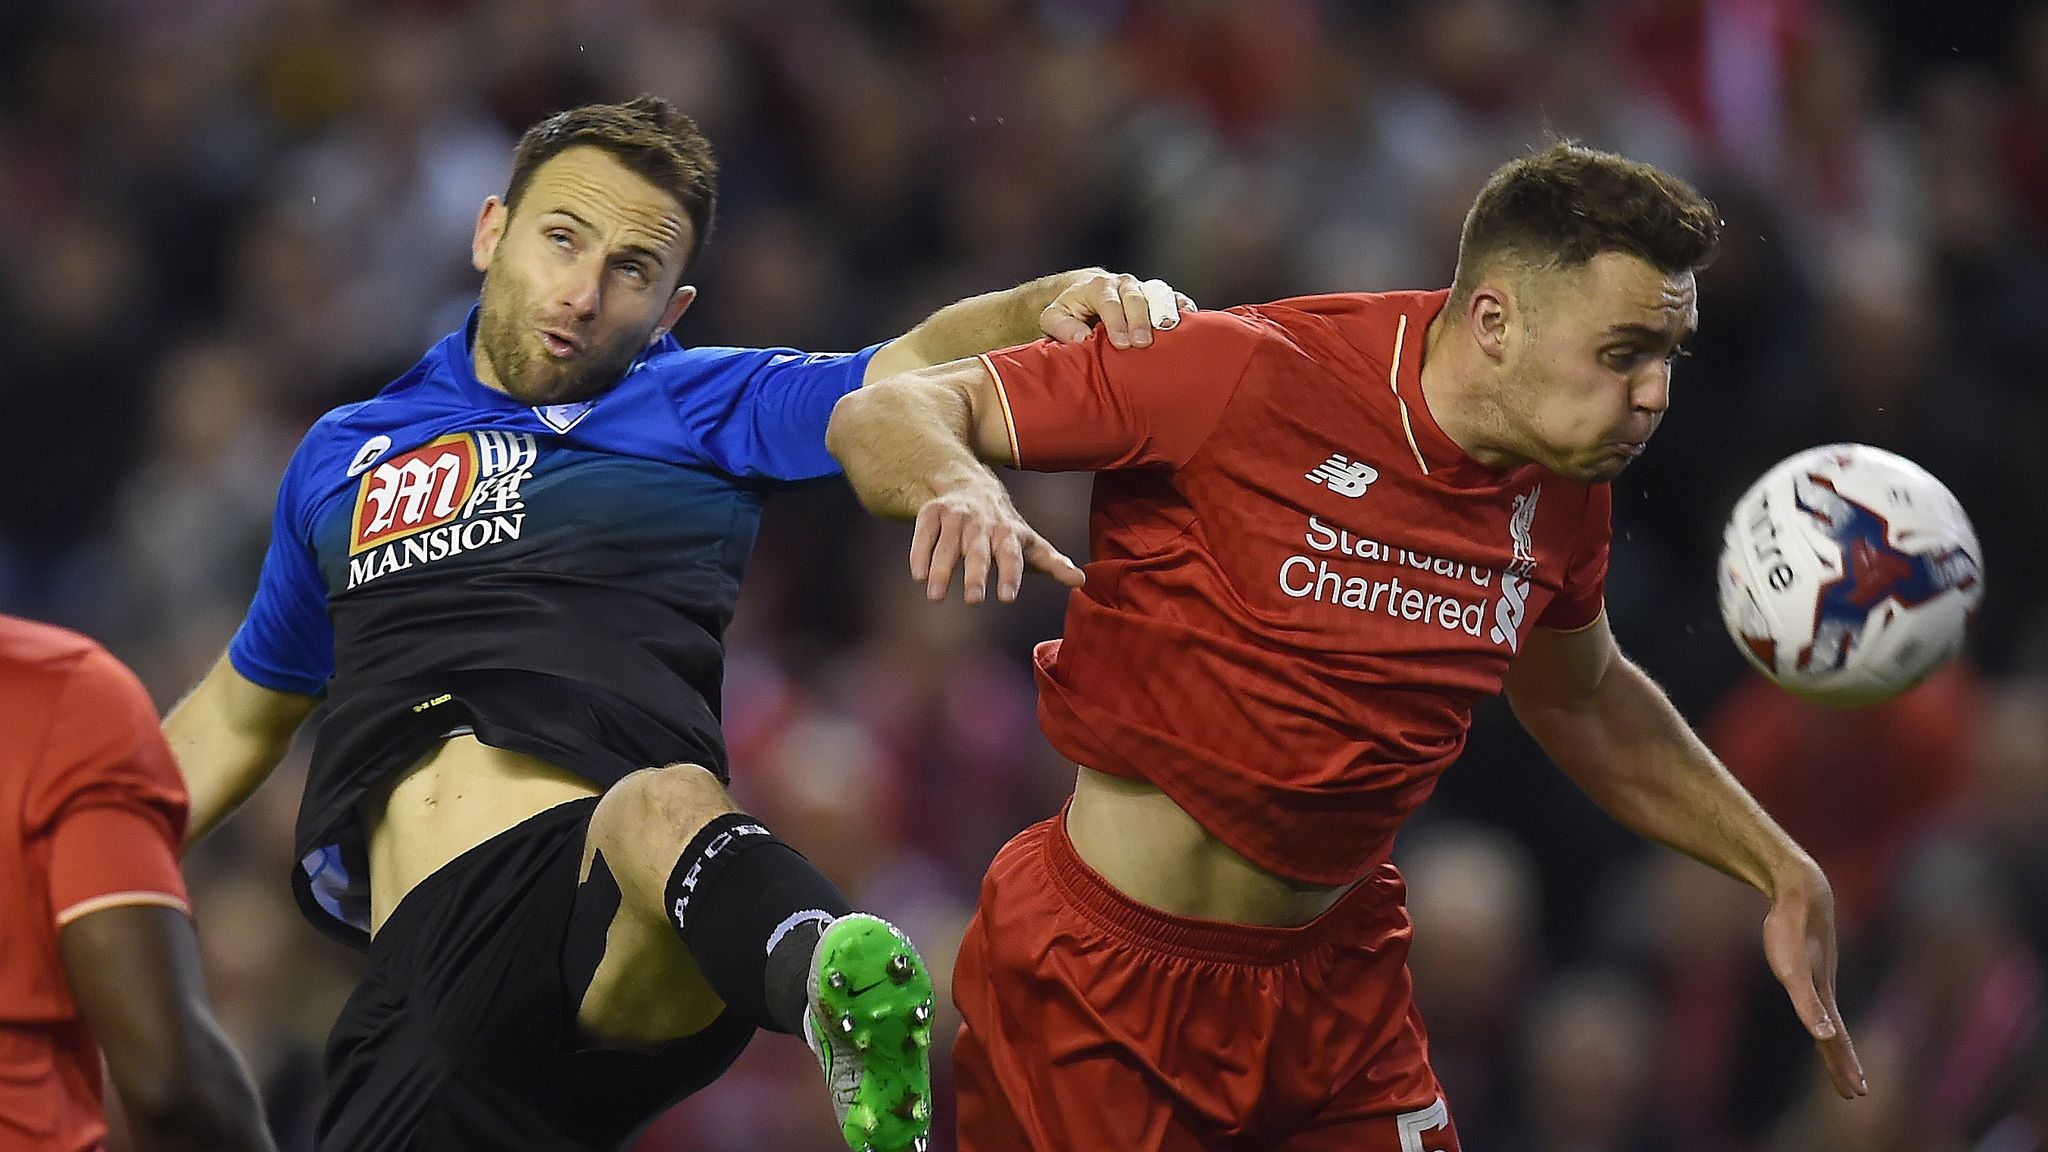 Connor Randall in dreamland after Liverpool debut at Anfield | Football ...